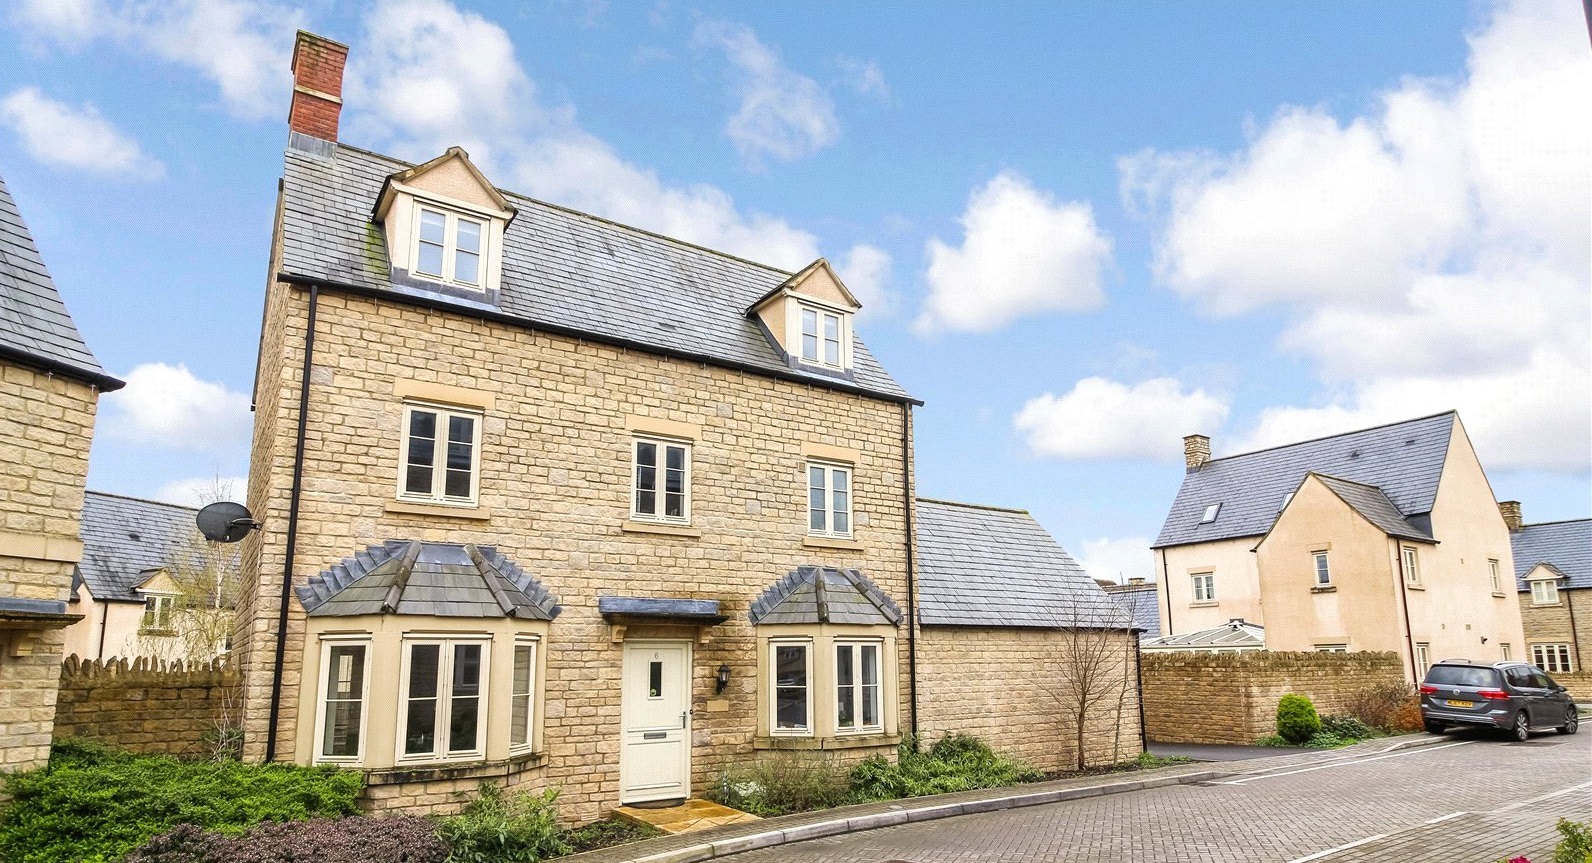 Property for sale in Cirencester: Five of the best on the market now